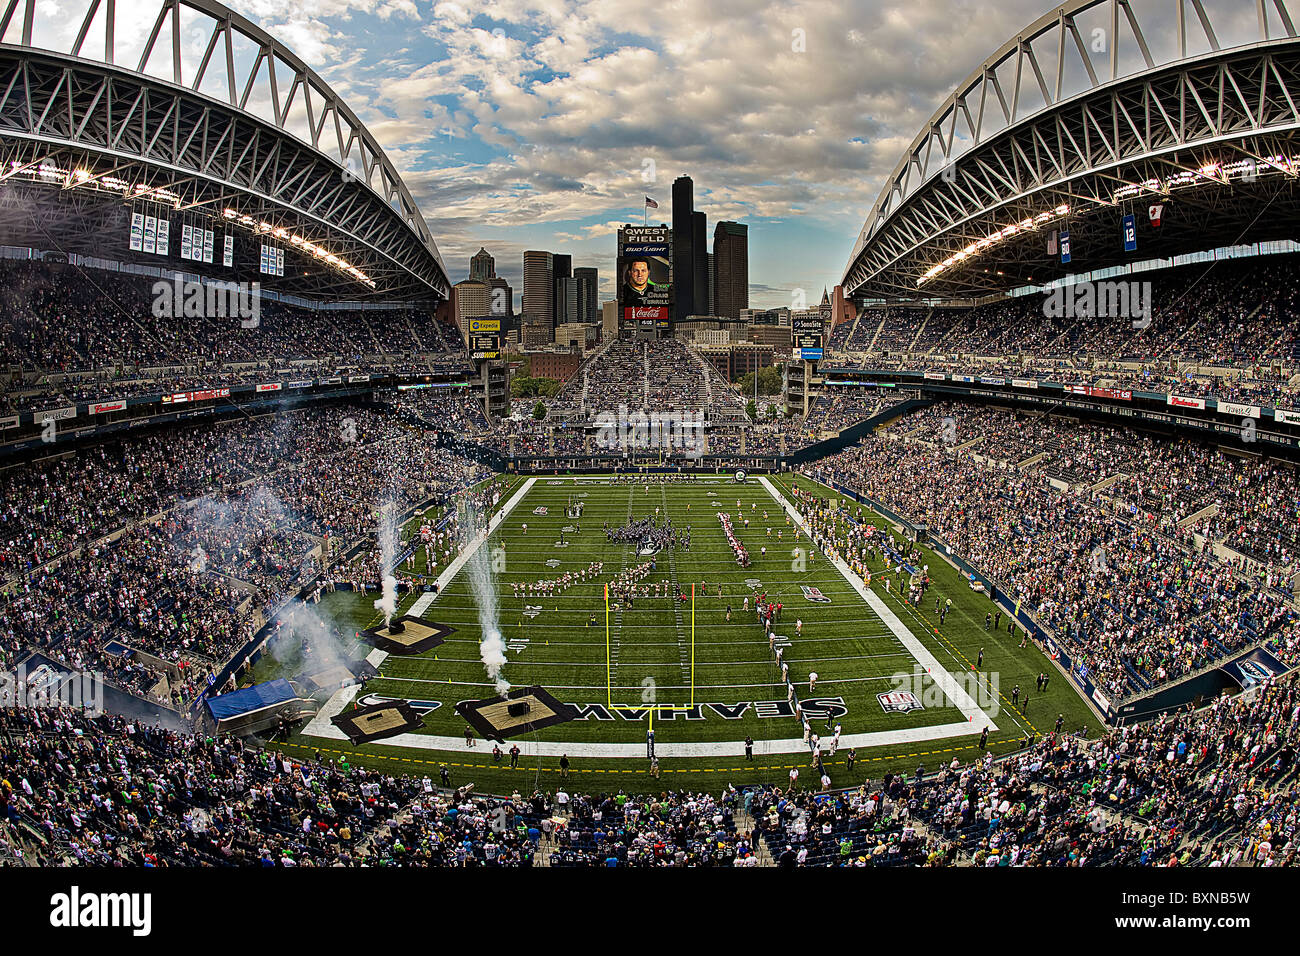 Qwest Field home of the Seattle Seahawks NFL Football team Stock Photo